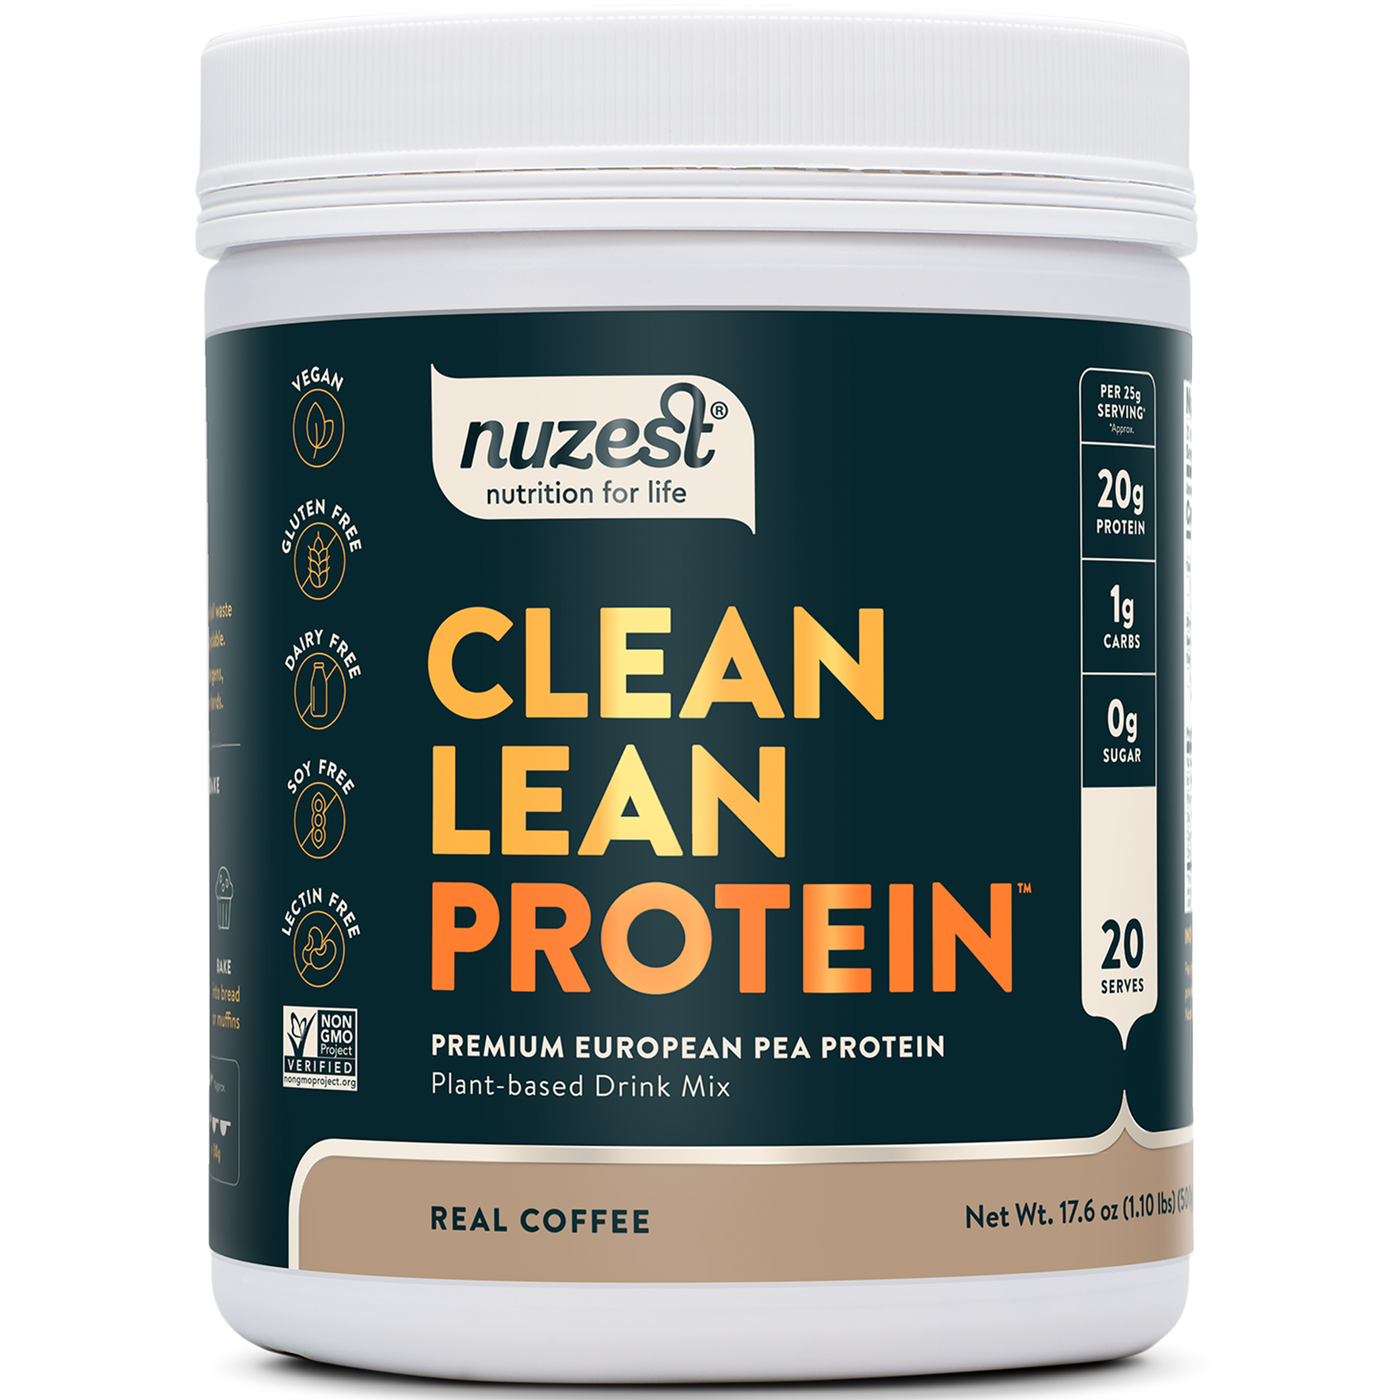 Clean Lean Protein Coffee ings Curated Wellness